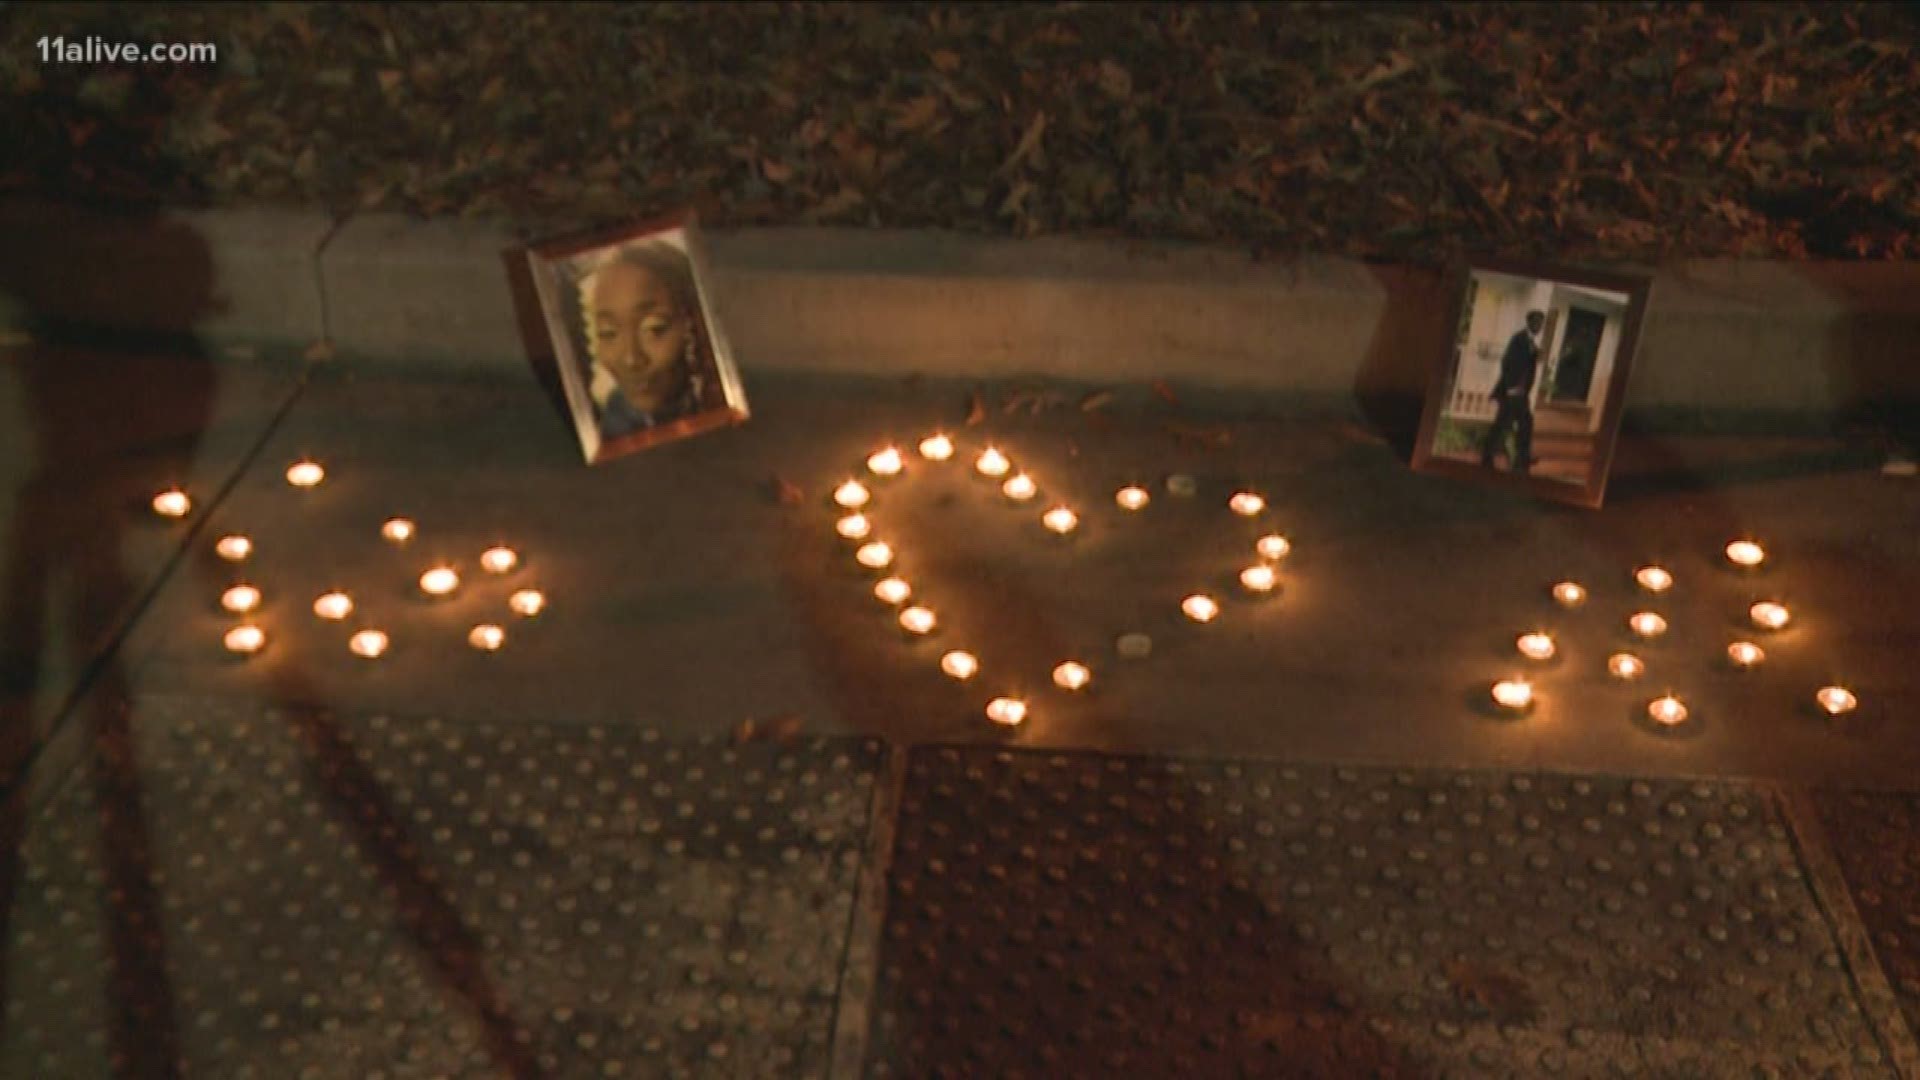 More than a dozen people showed up for the vigil held in remembrance of Jaydah Curry and Josh Baker.